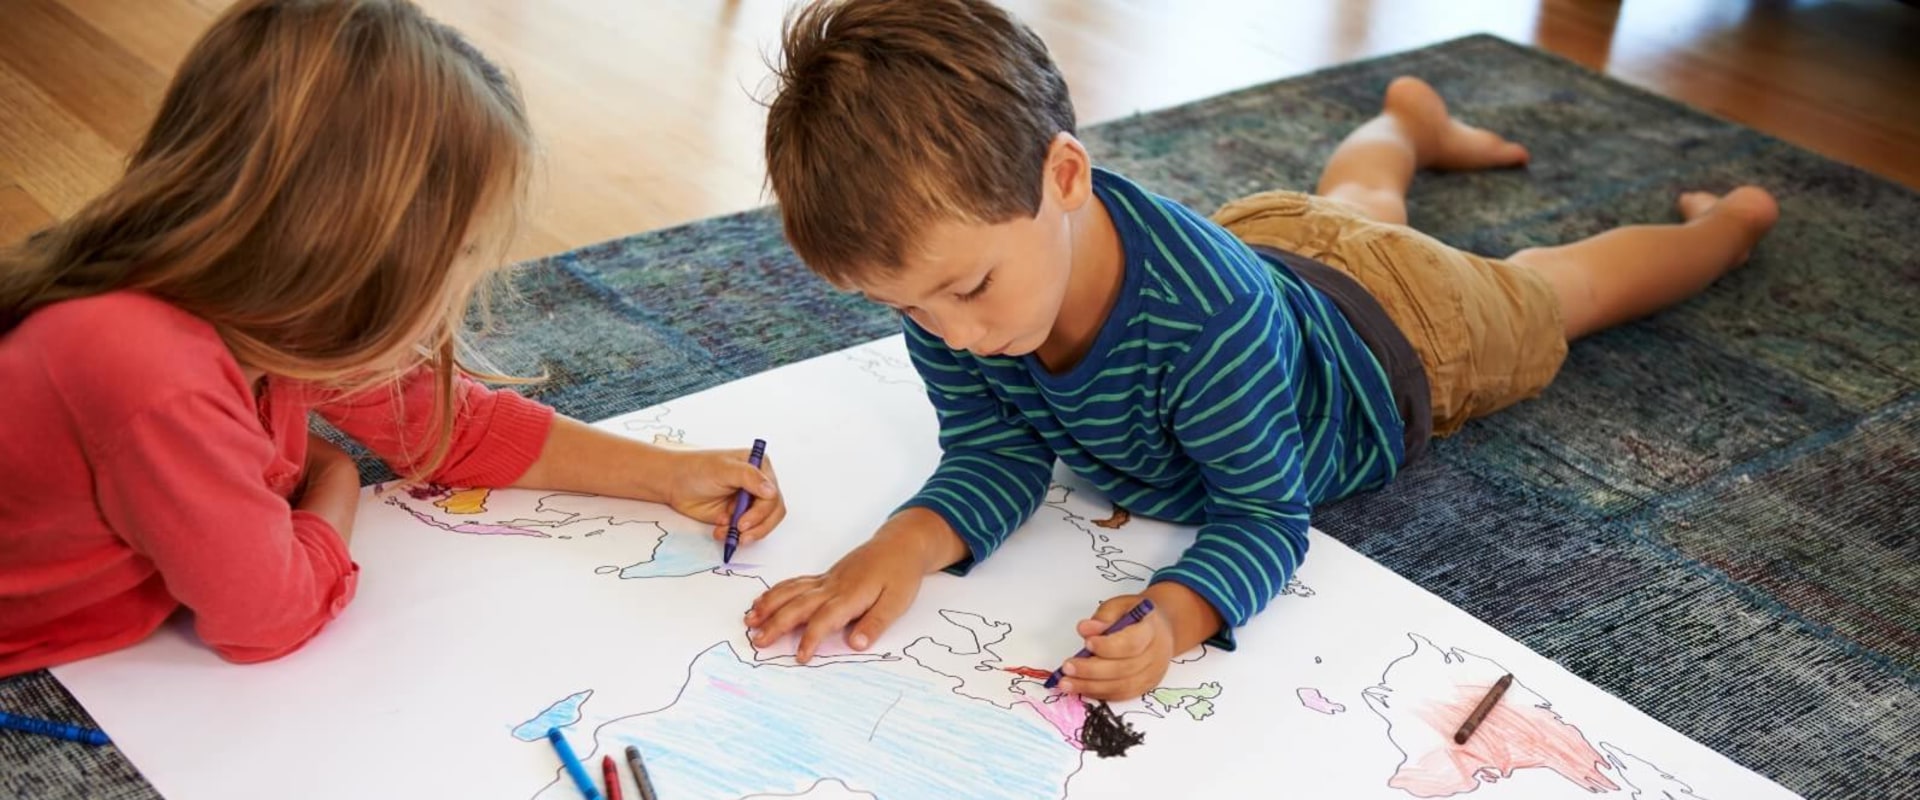 A Parent's Guide to Geography and Map Skills for Elementary School Students